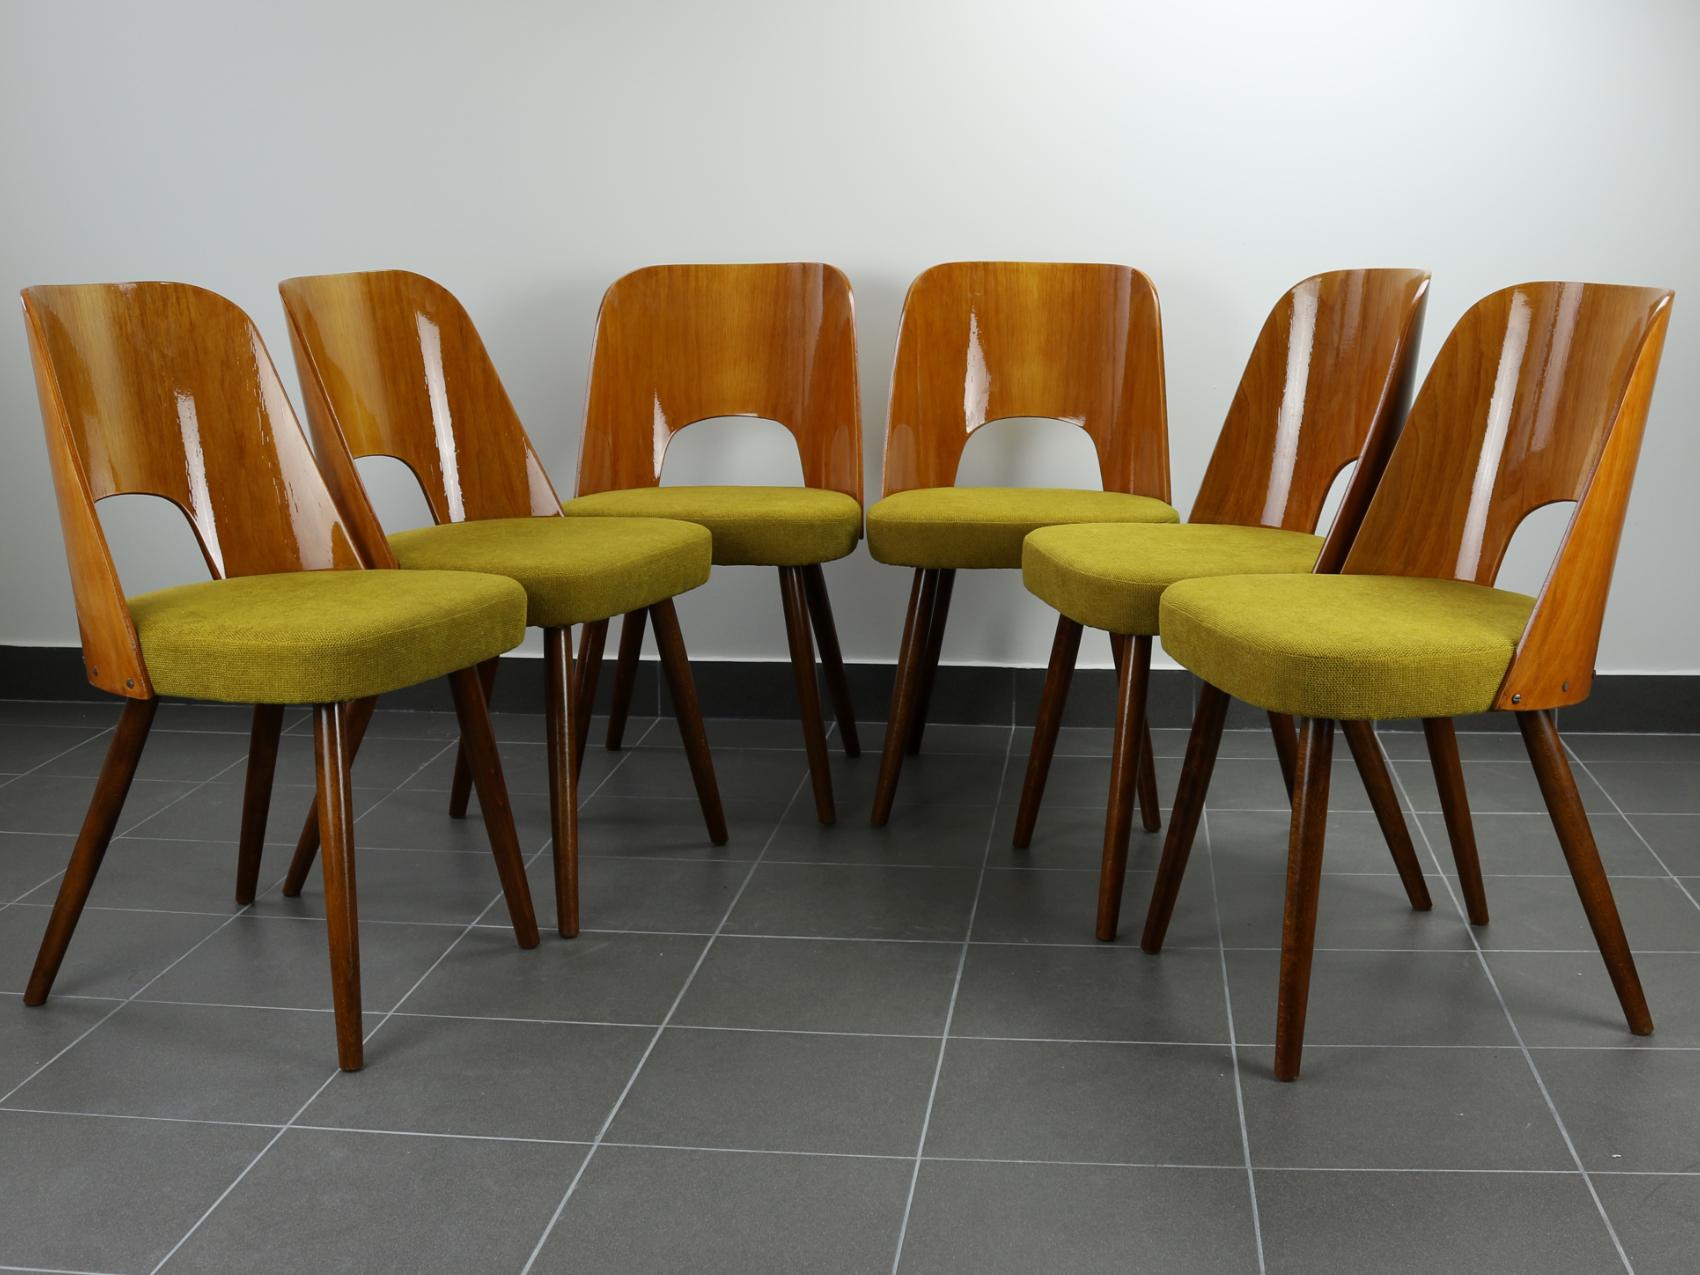 This set of six dining chairs was designed by Oswald Haerdtl for Thonet in 1955. The chairs are made of bent beech plywood formed structures and round tapered wooden legs. Fully restored with new upholstery.